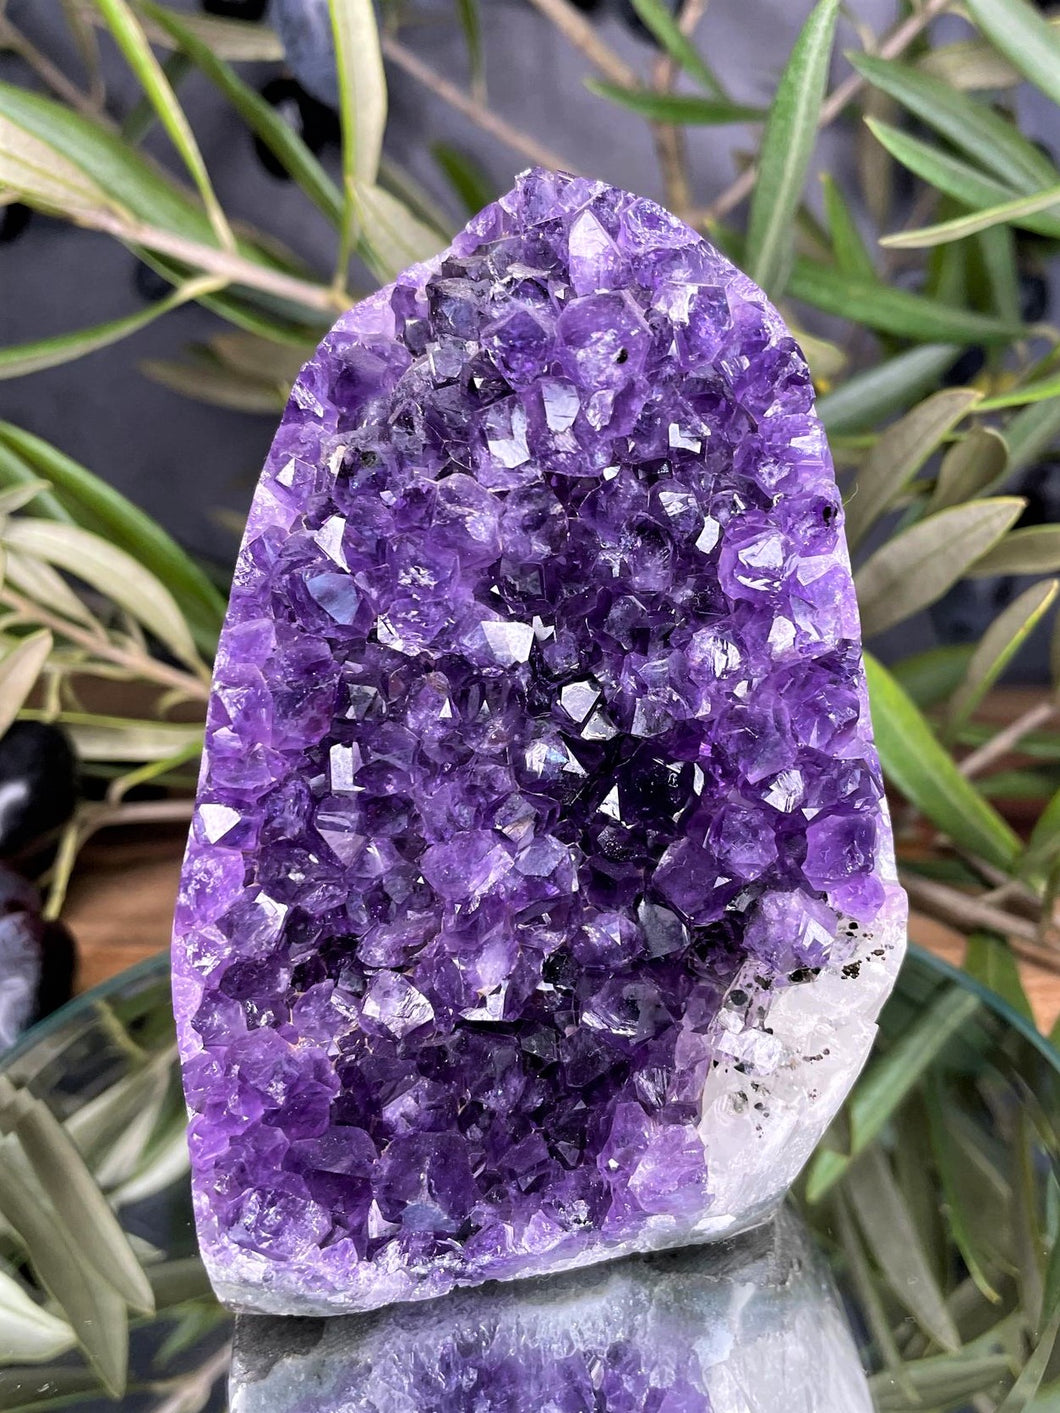 Chakra Healing Amethyst Cluster Geode With Calcite Crystal Inclusion